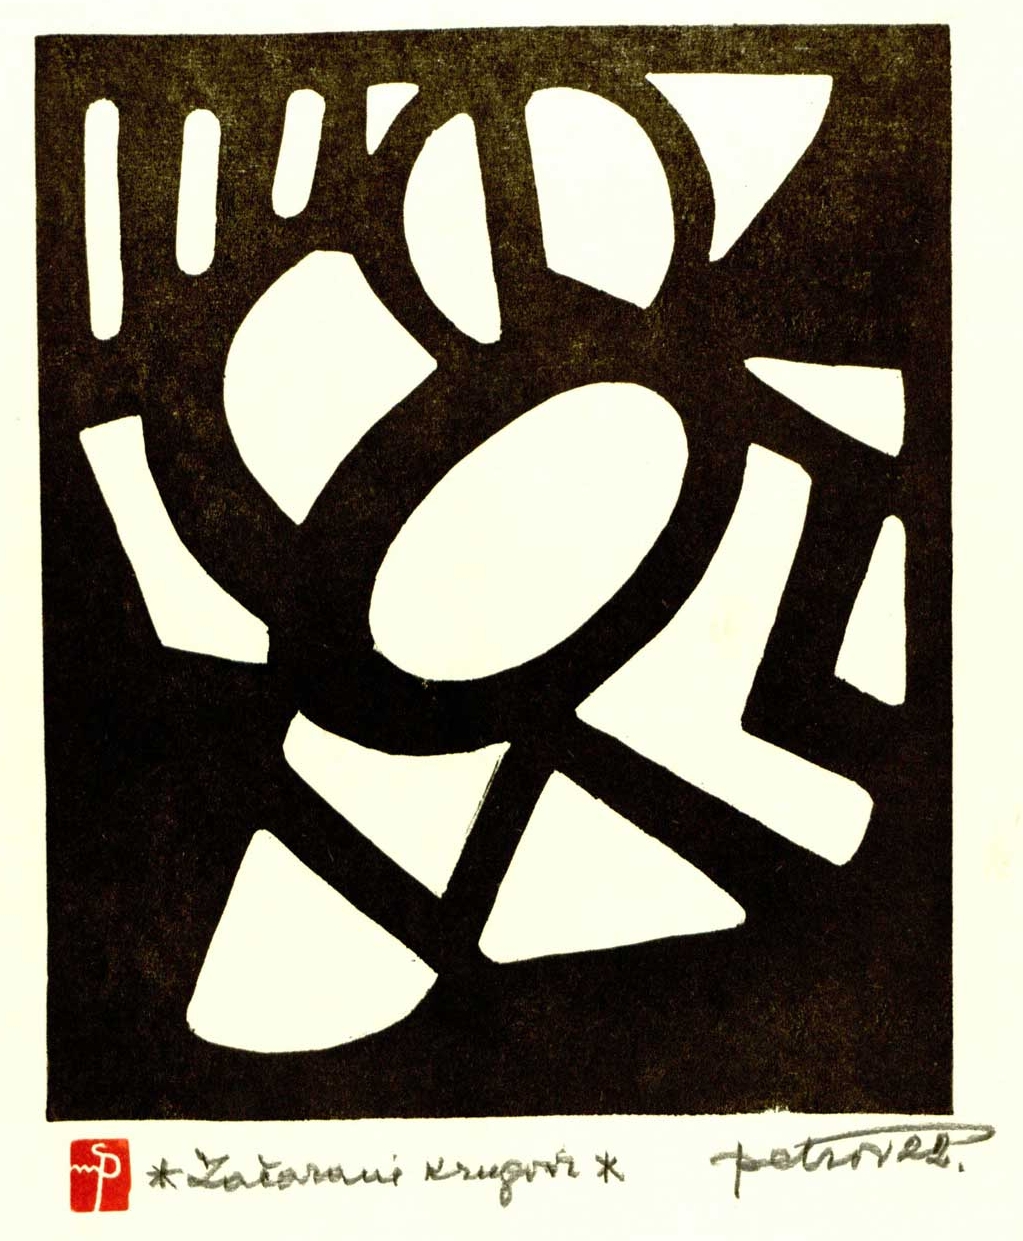 Serbian abstract black and white linocut print